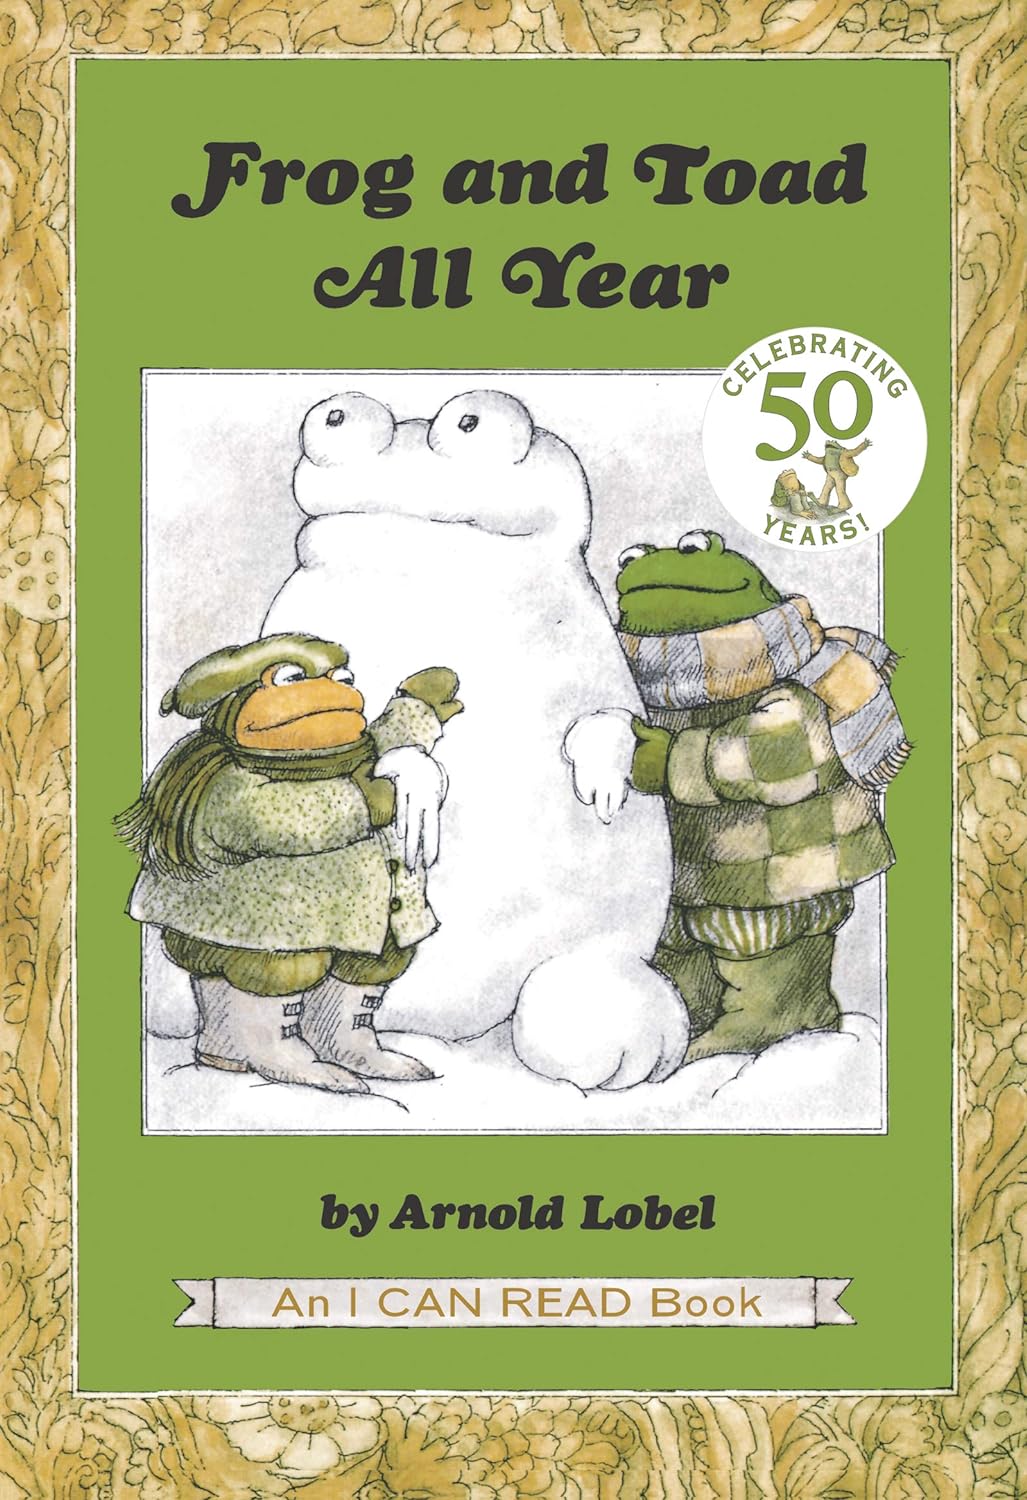 Main characters, a Frog and a Toad, standing with a snowman frog between them